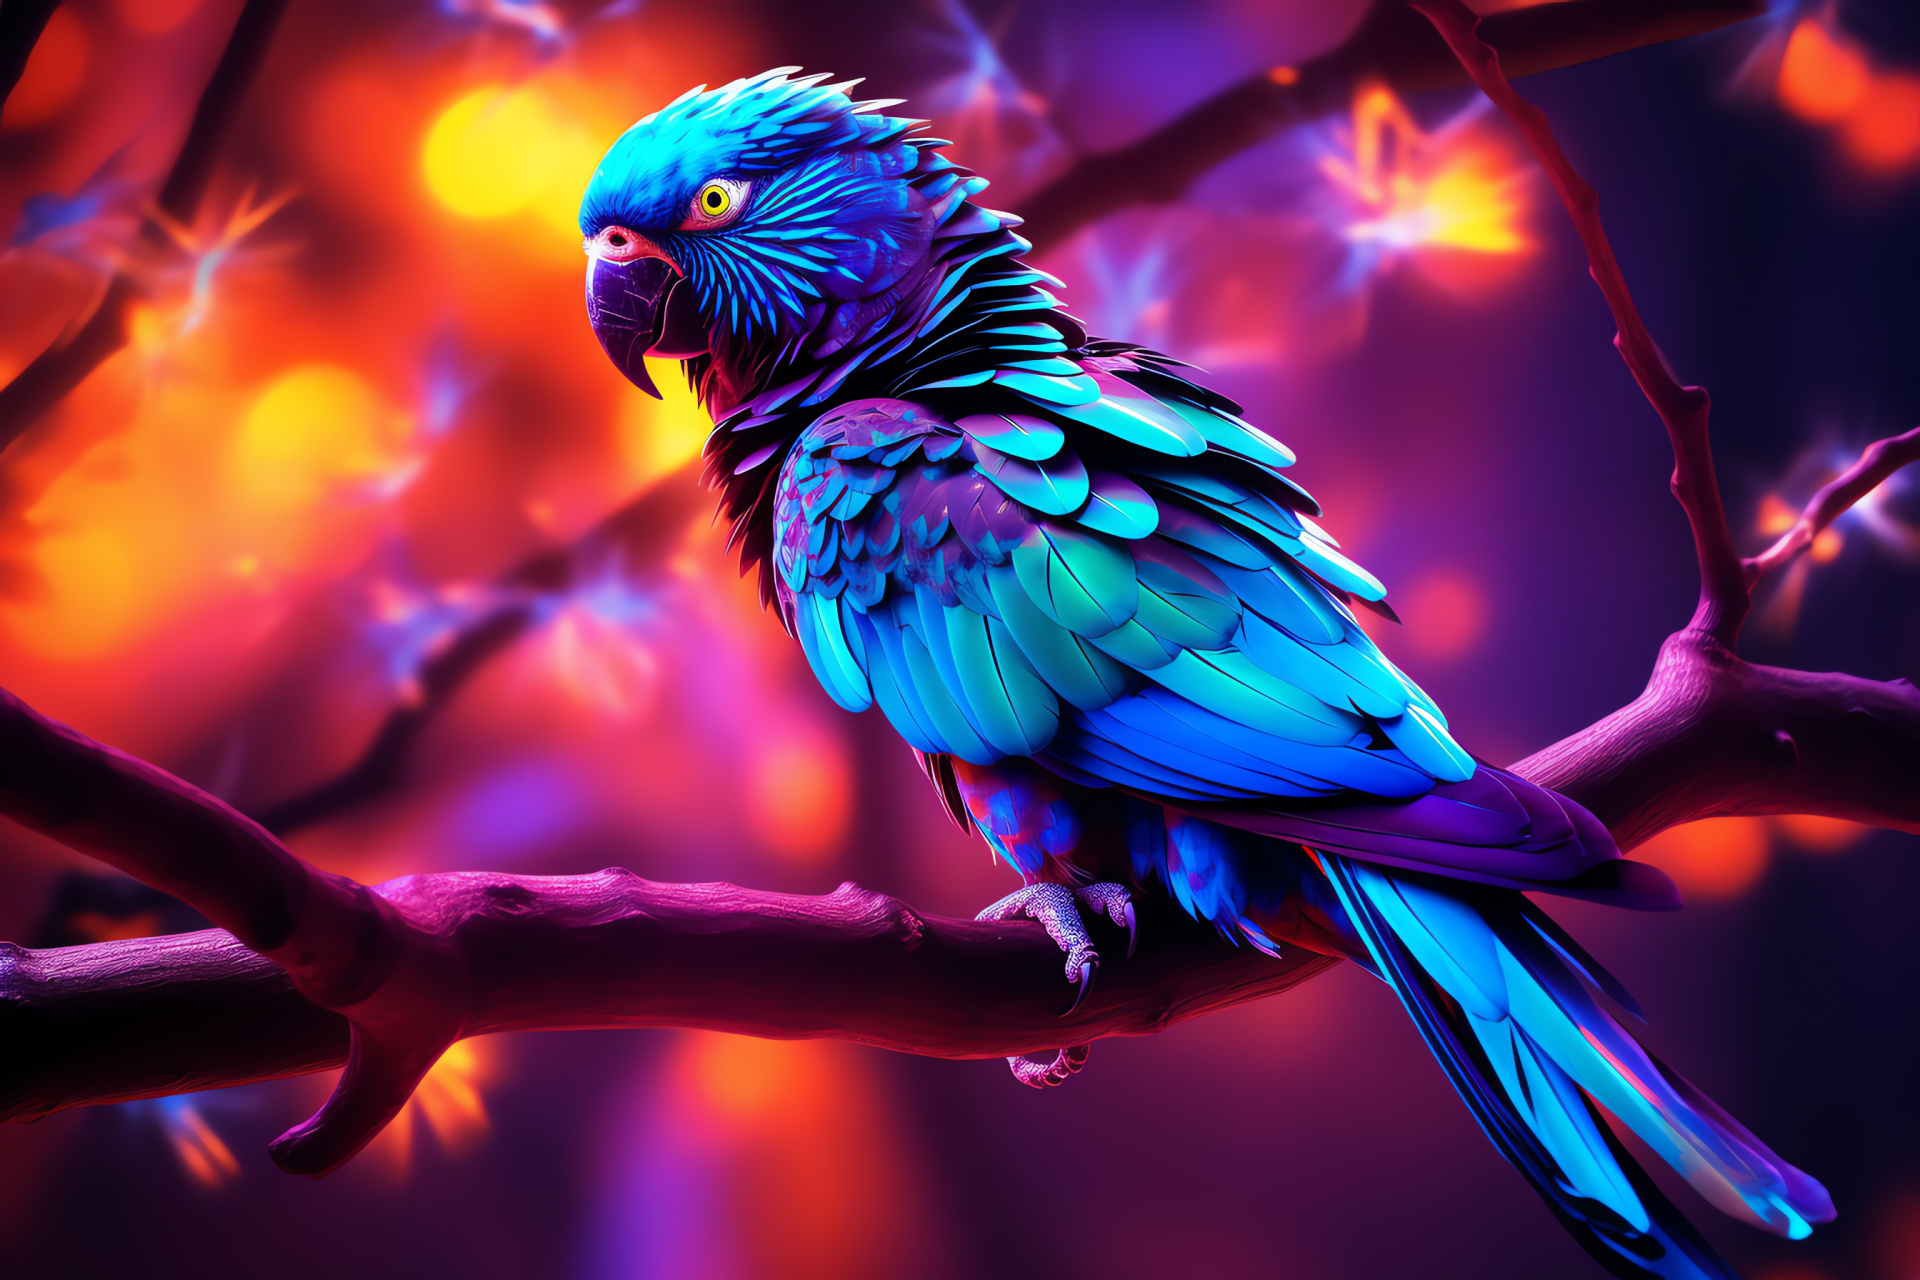 Exotic parrot, vibrant plumage, tree branches, backlighting effects, majestic birds, HD Desktop Image